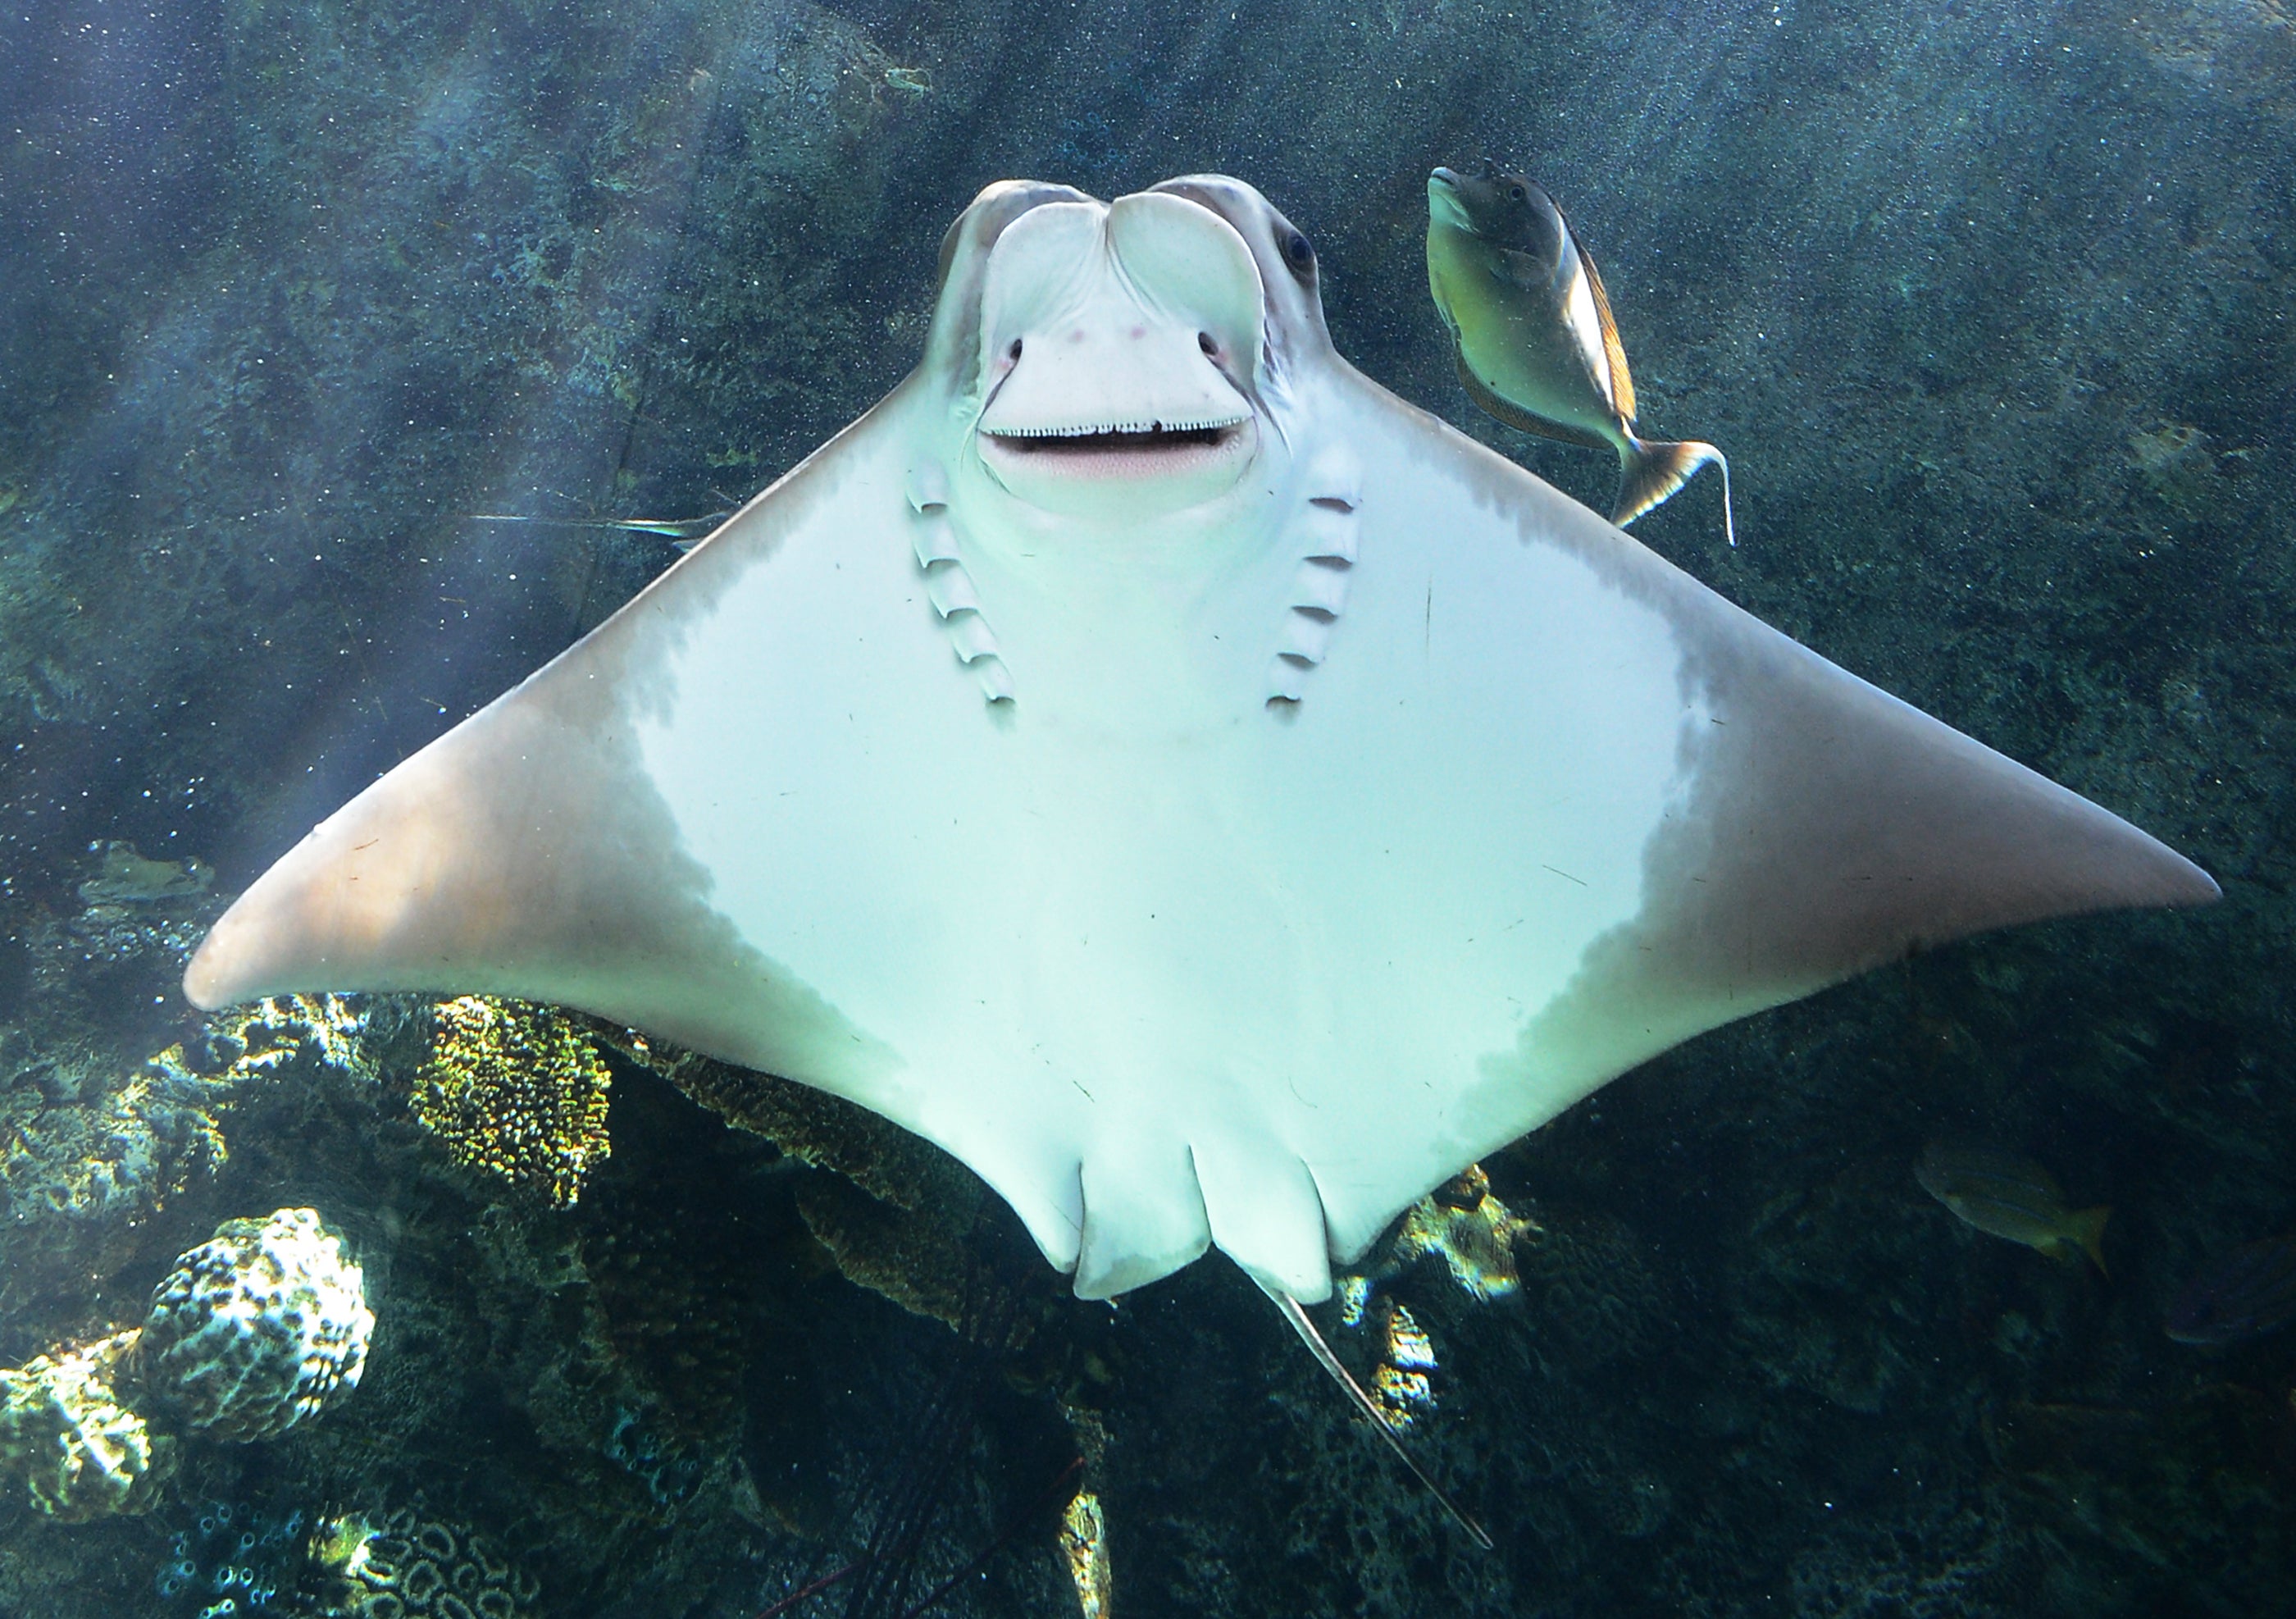 File image: A cownose ray swims at the Aquarium of the Pacific in Long Beach, California, on 26 April 2012